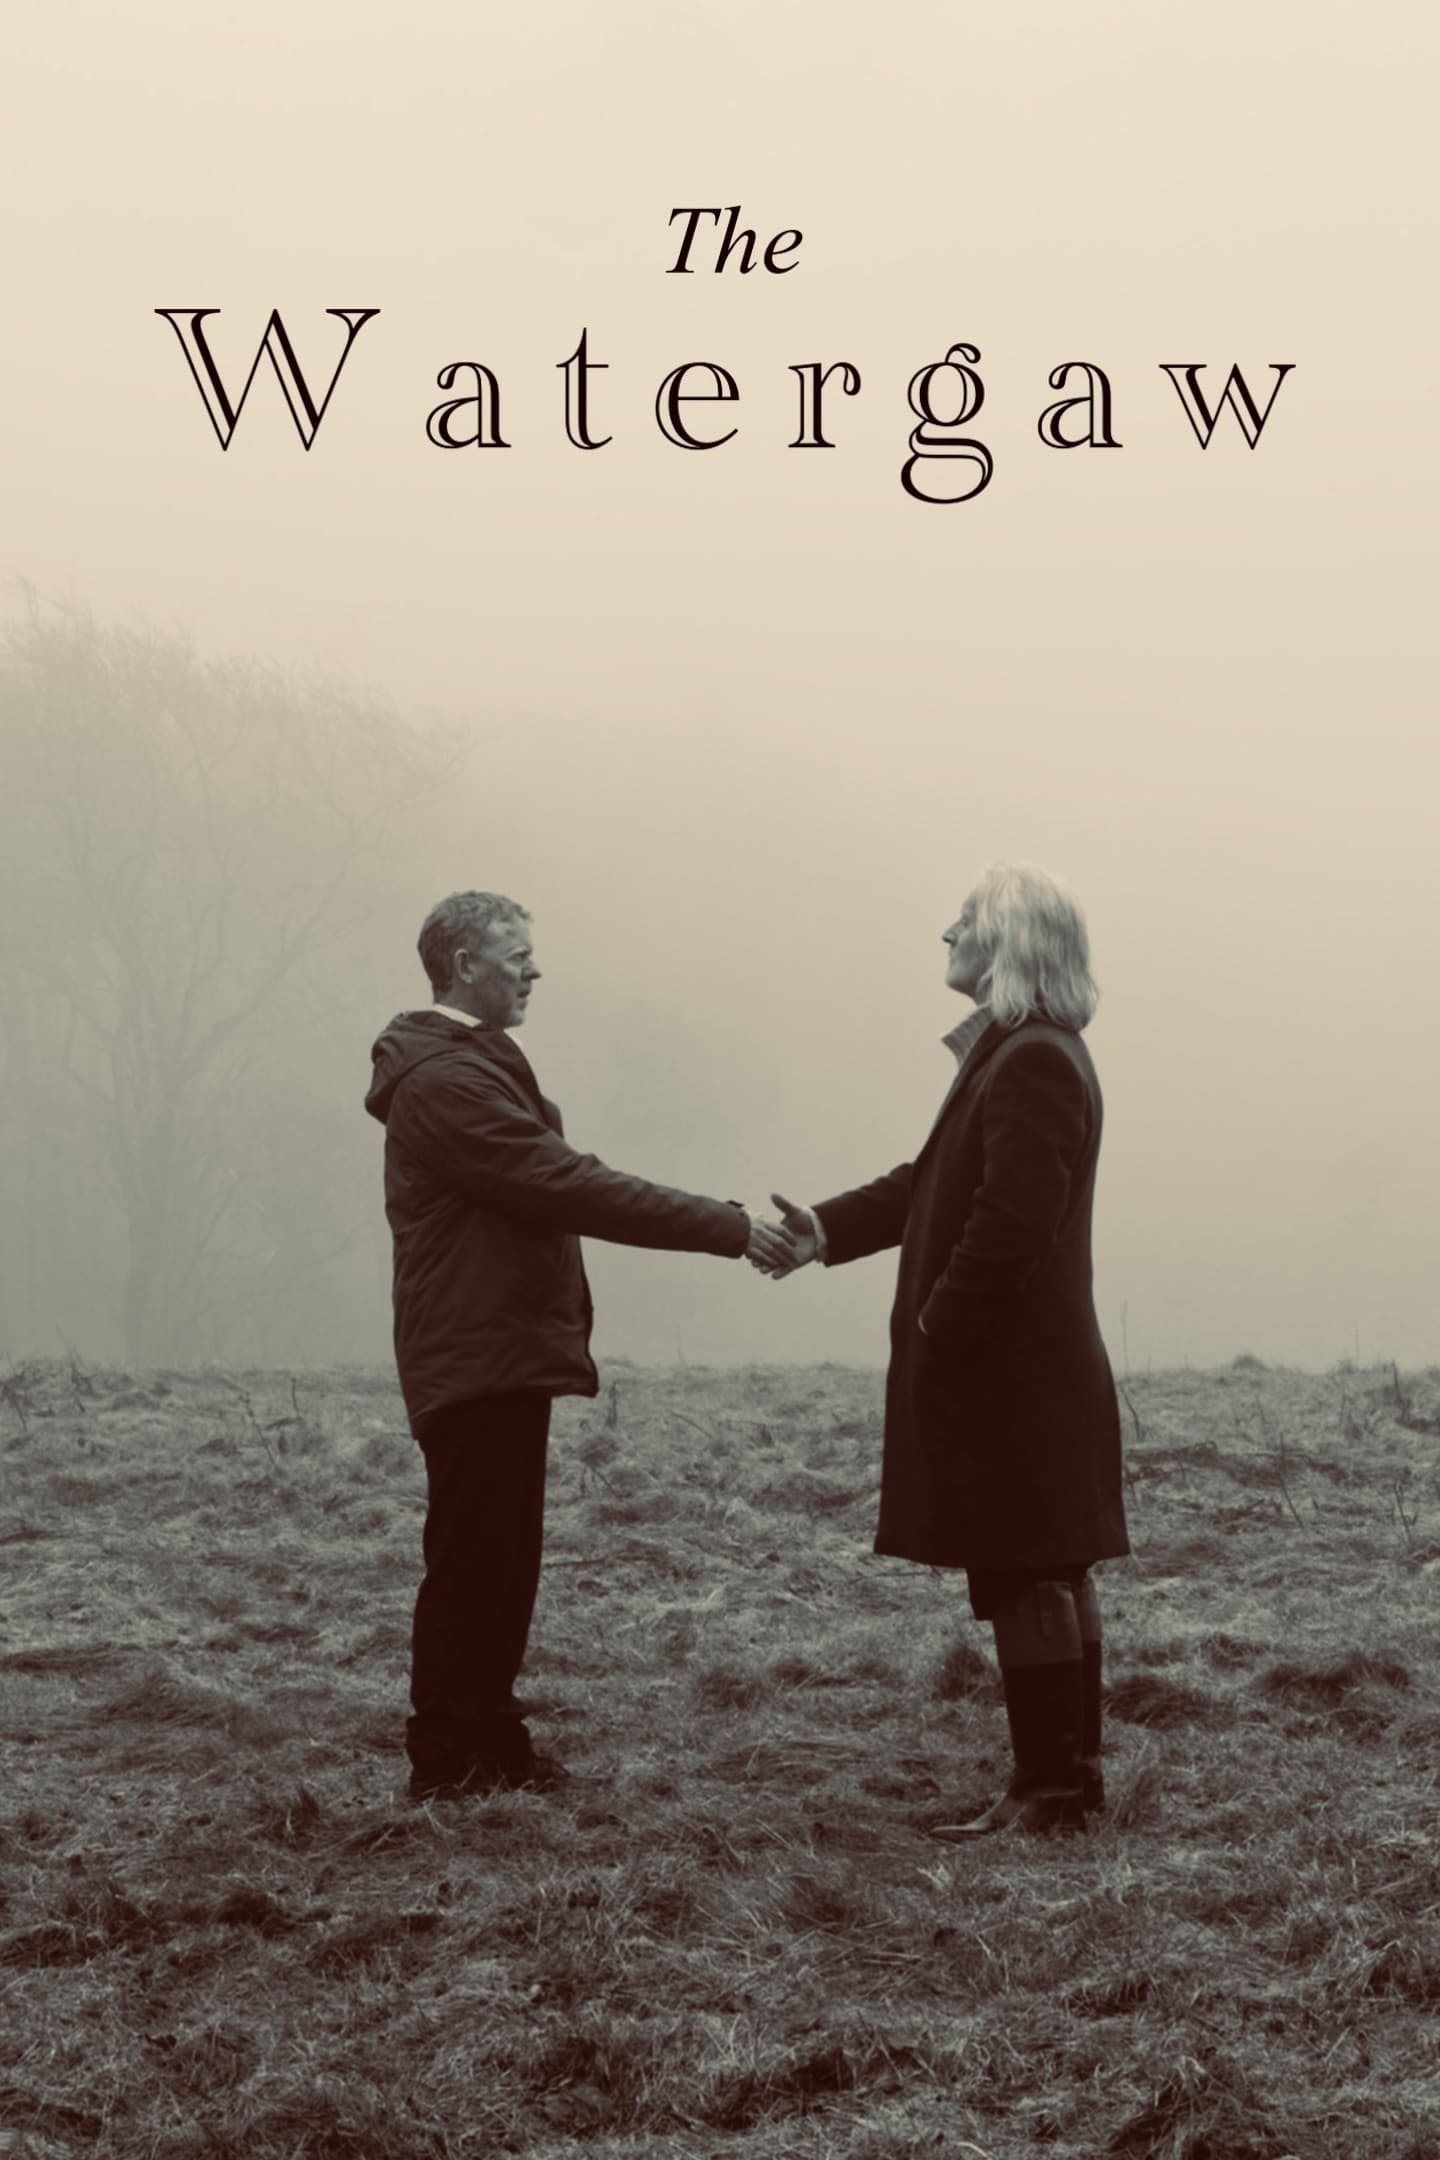 The Watergaw